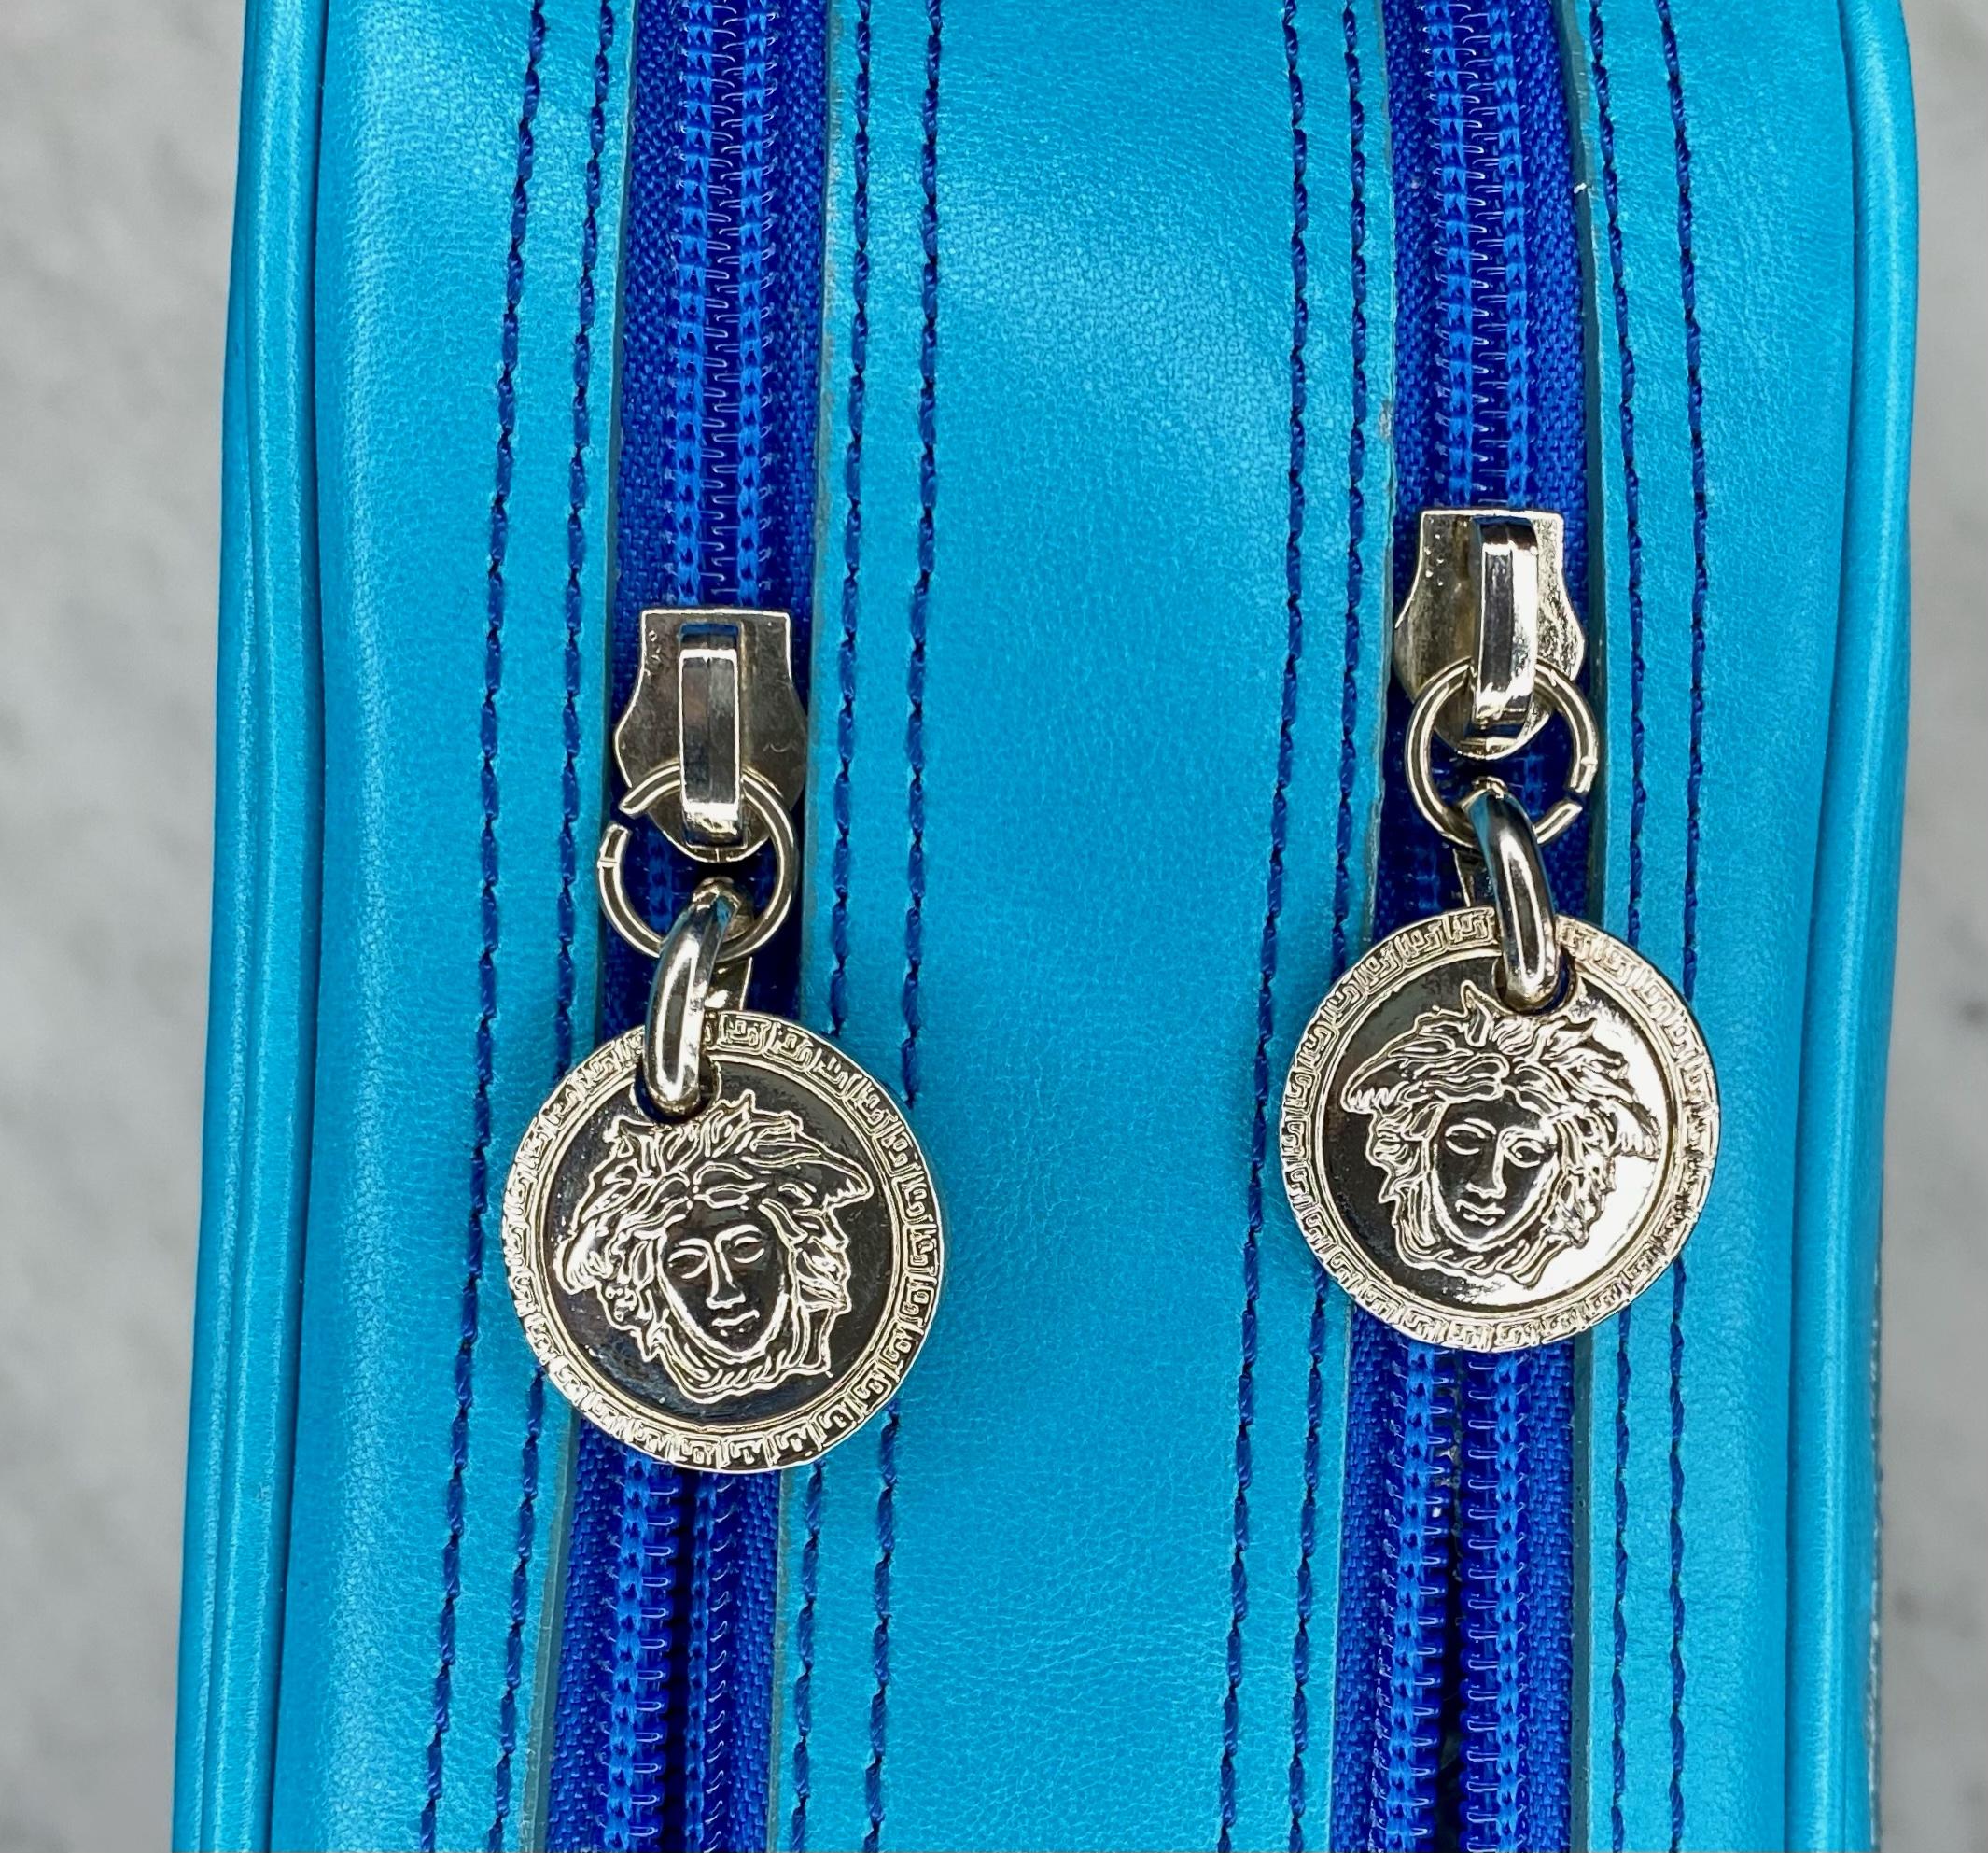 1990s Gianni Versace Blue Medusa Medallion Clutch Bag Travel Toiletry with Tag For Sale 1